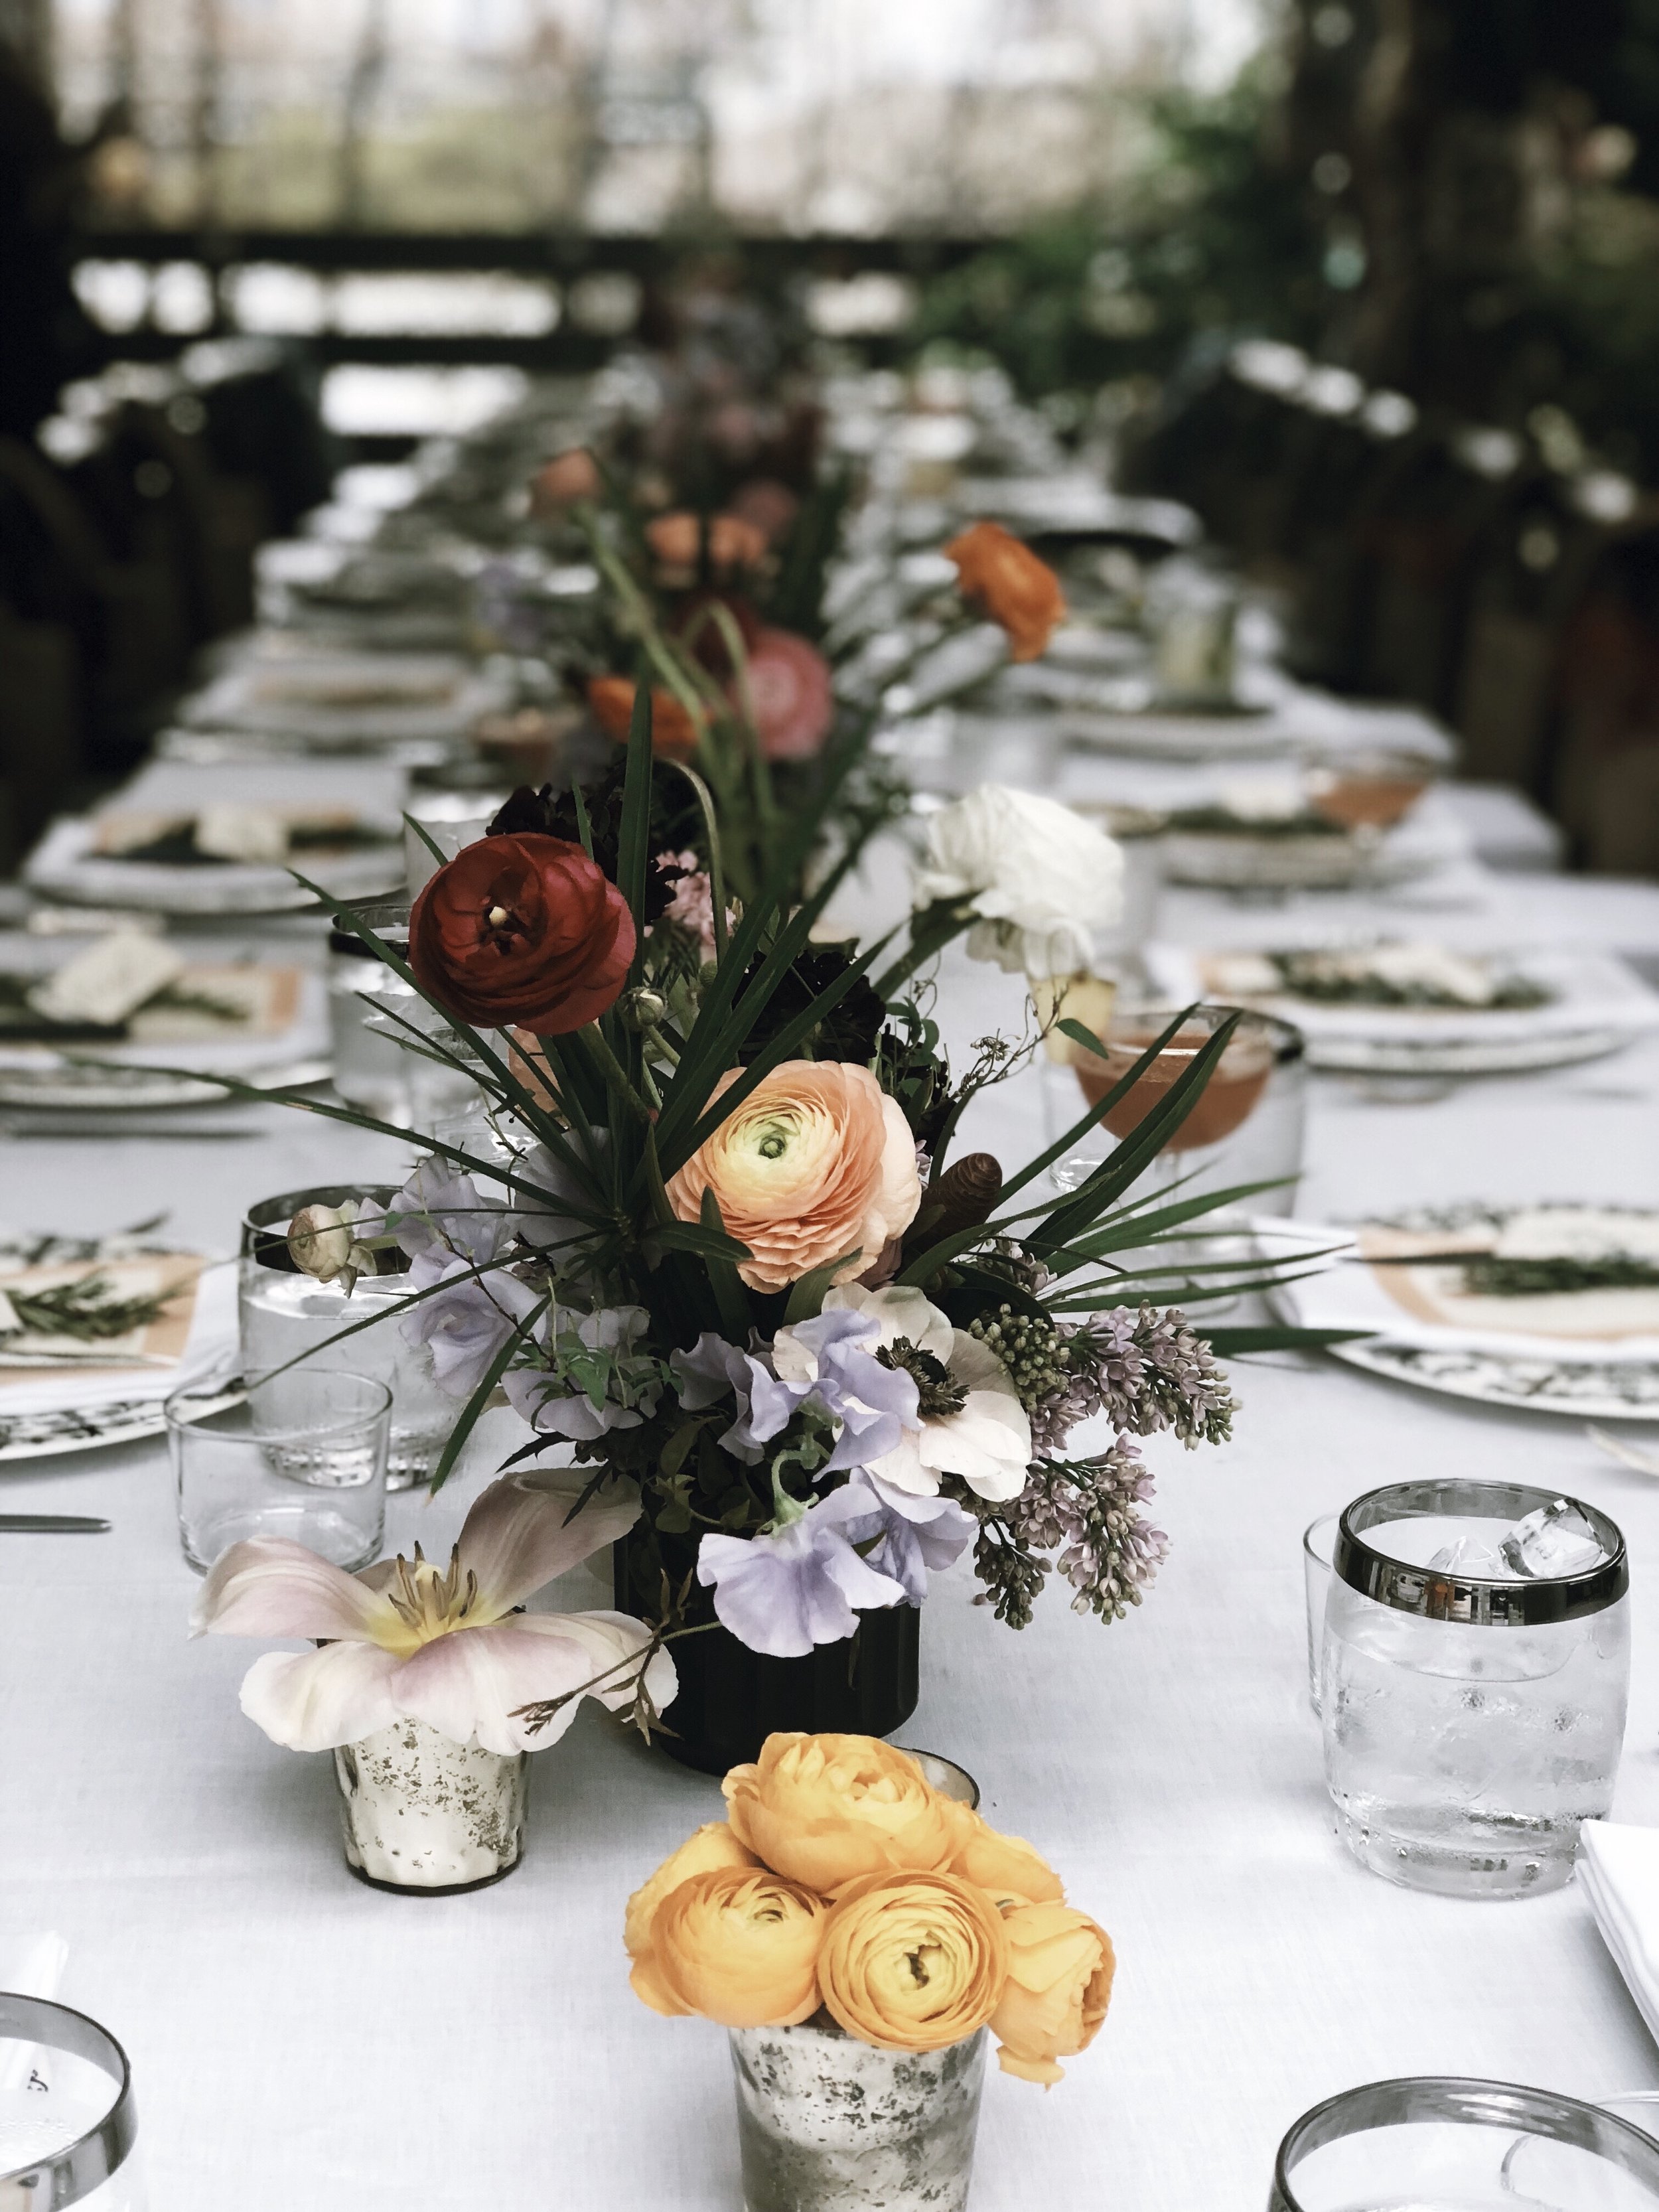  Patricio of Twelve Thirty Four Flowers created stunning arrangements to outfit the terrace dinner tablescape. 